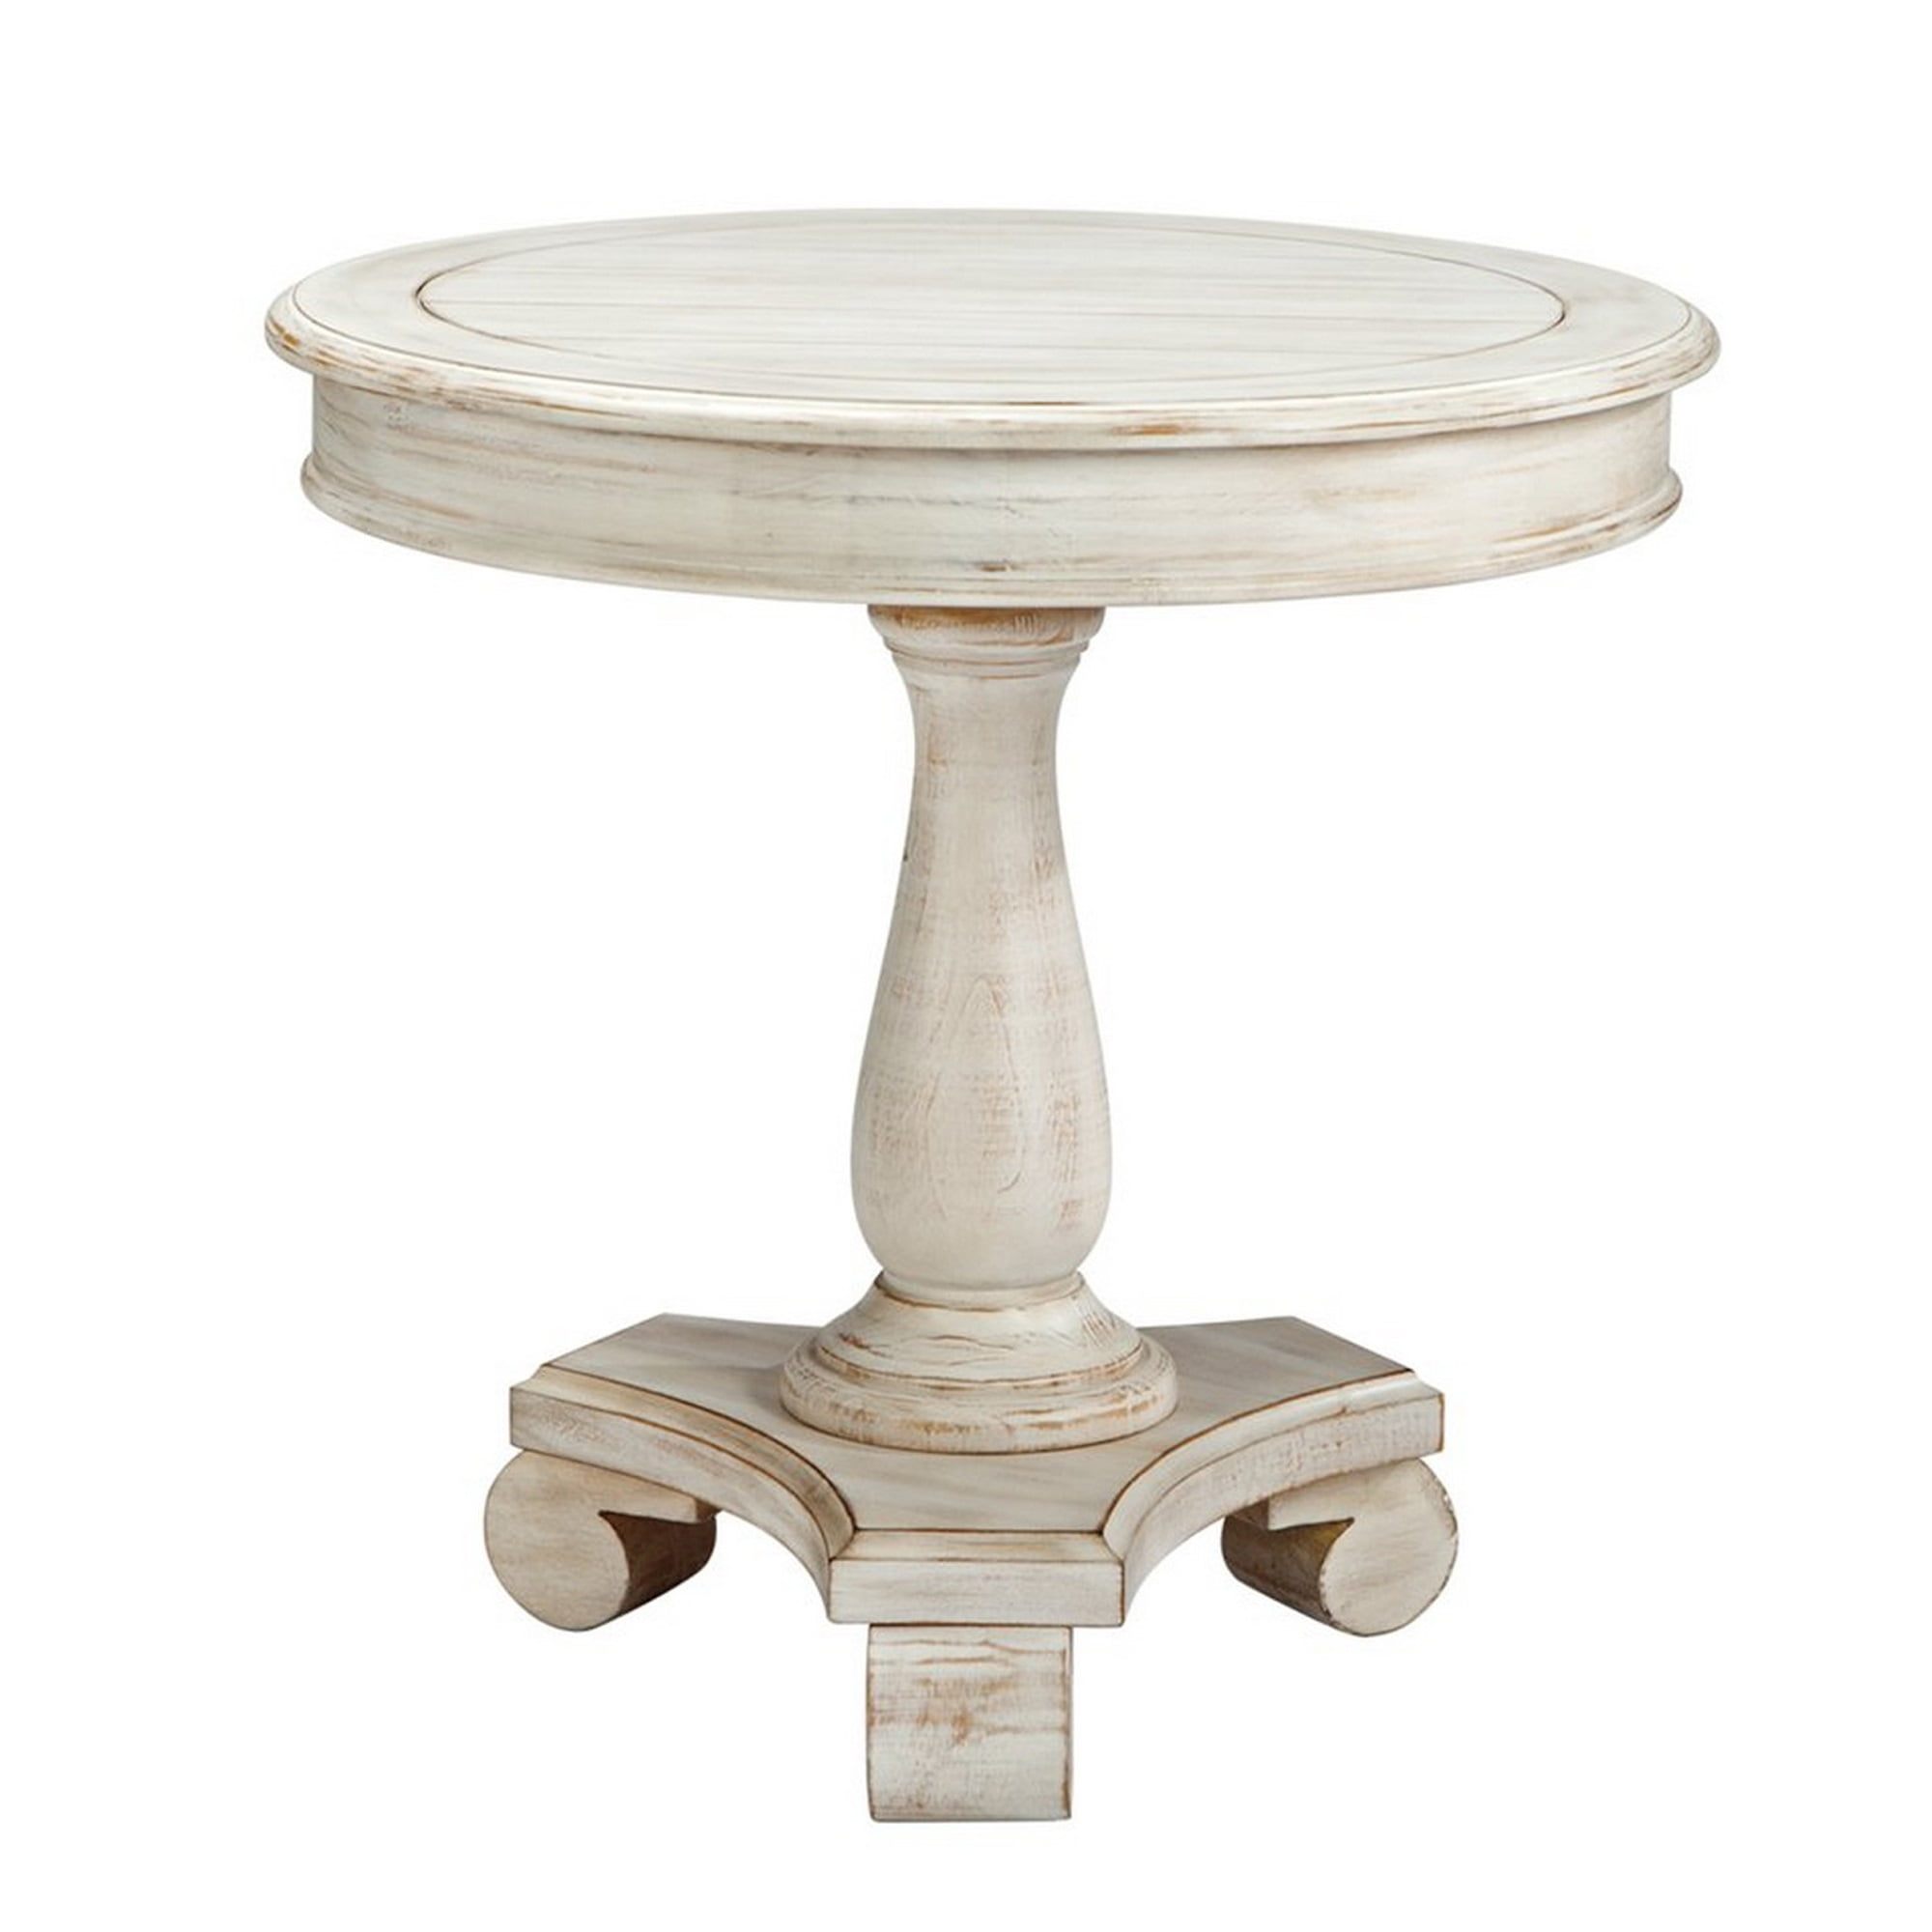 Classic White Round Wooden Side Table Pedestal Wood Accent End Furniture Stand 